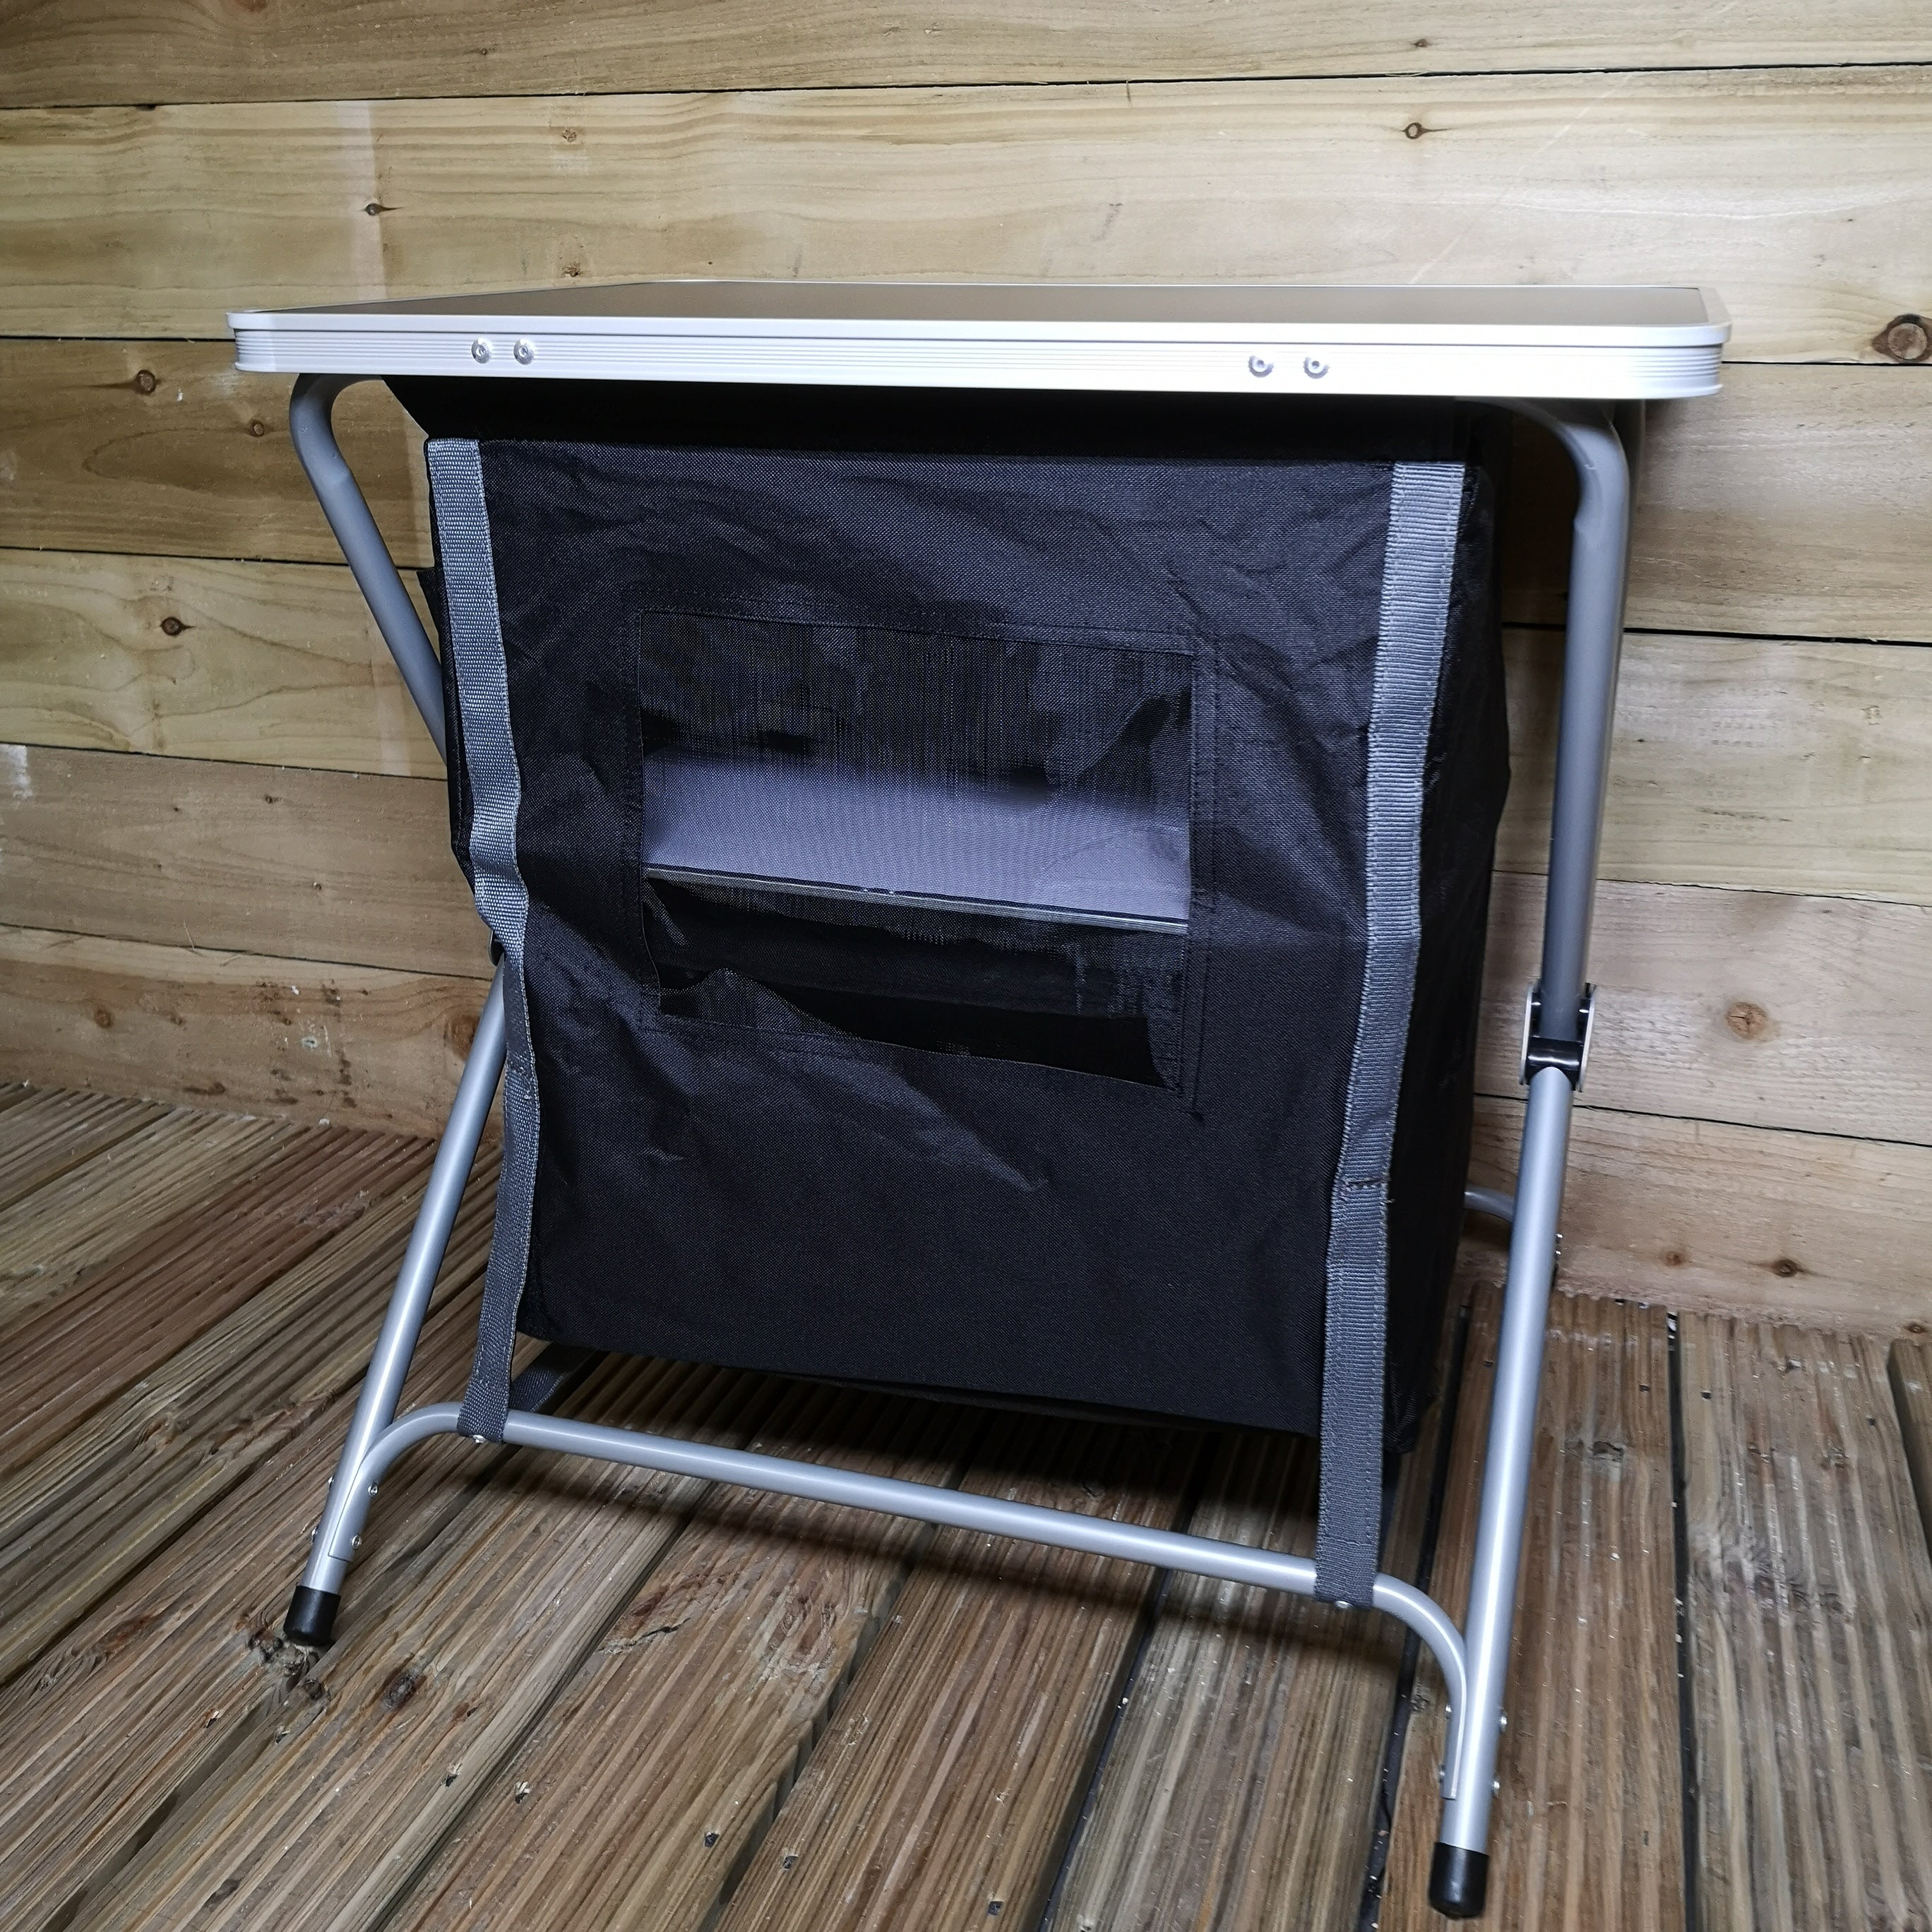 60cm Portable Foldable Camping Table / Cabinet in Black